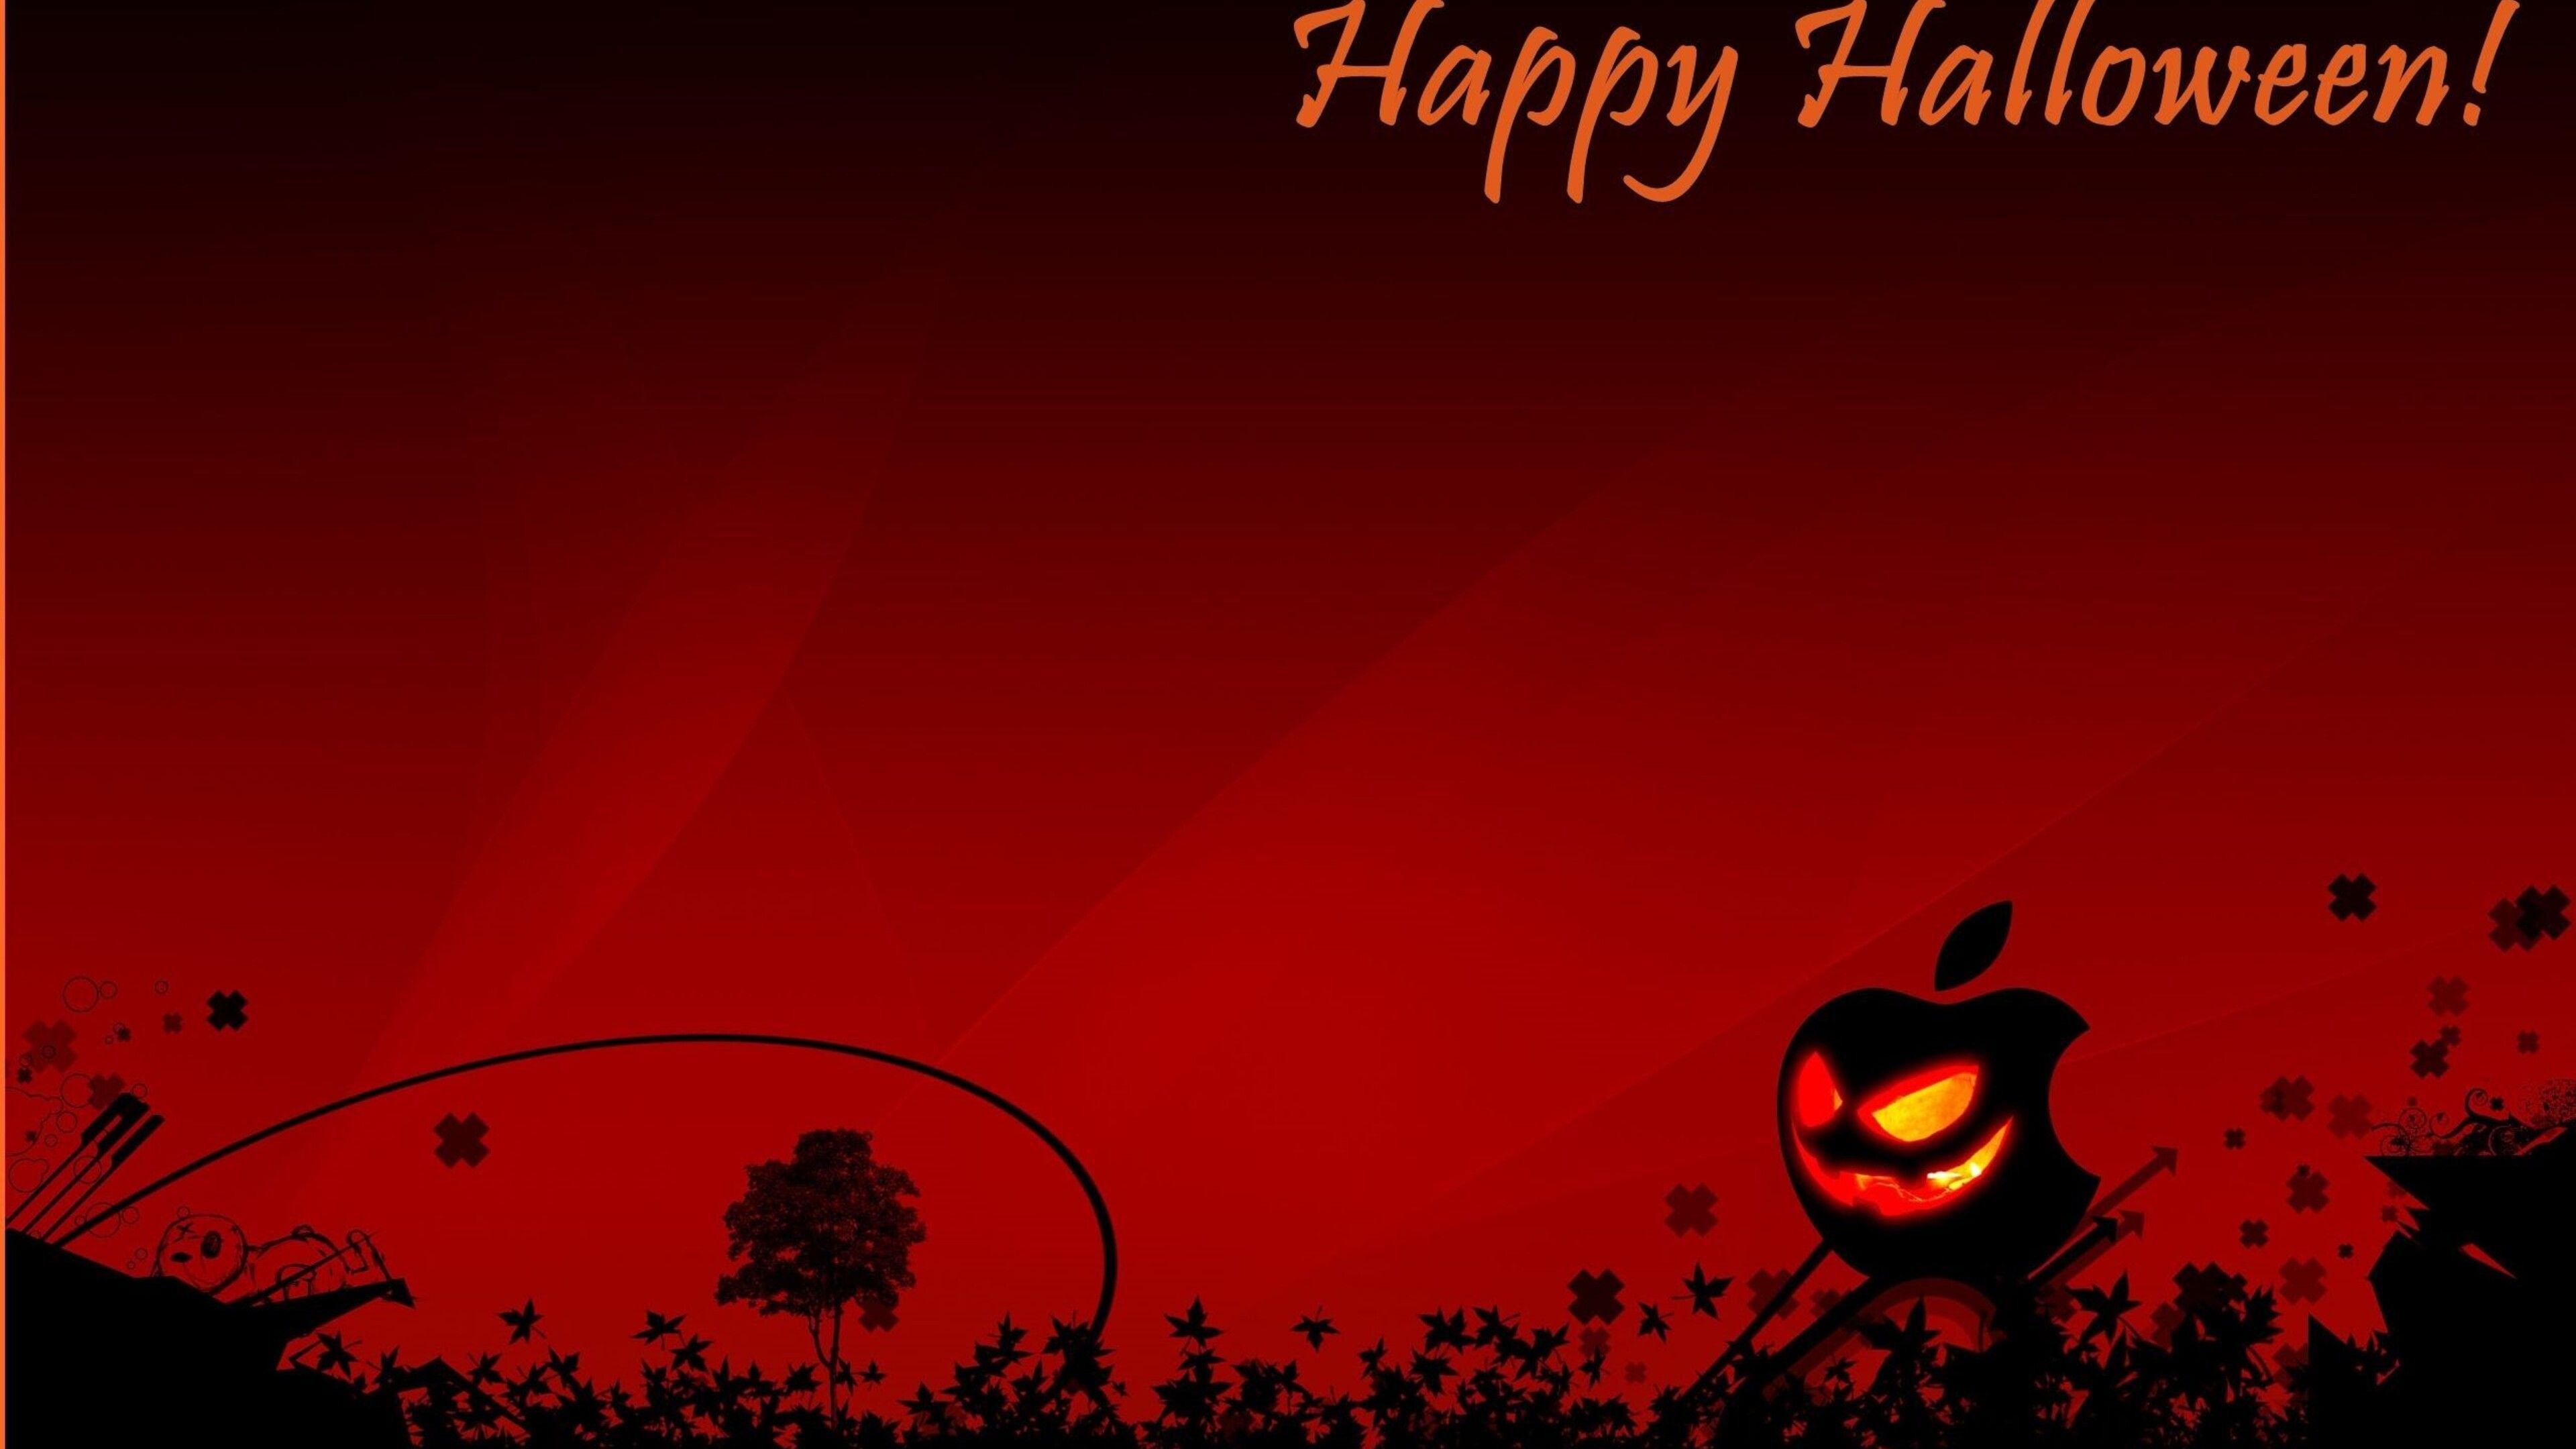 Happy Halloween on fire and red background